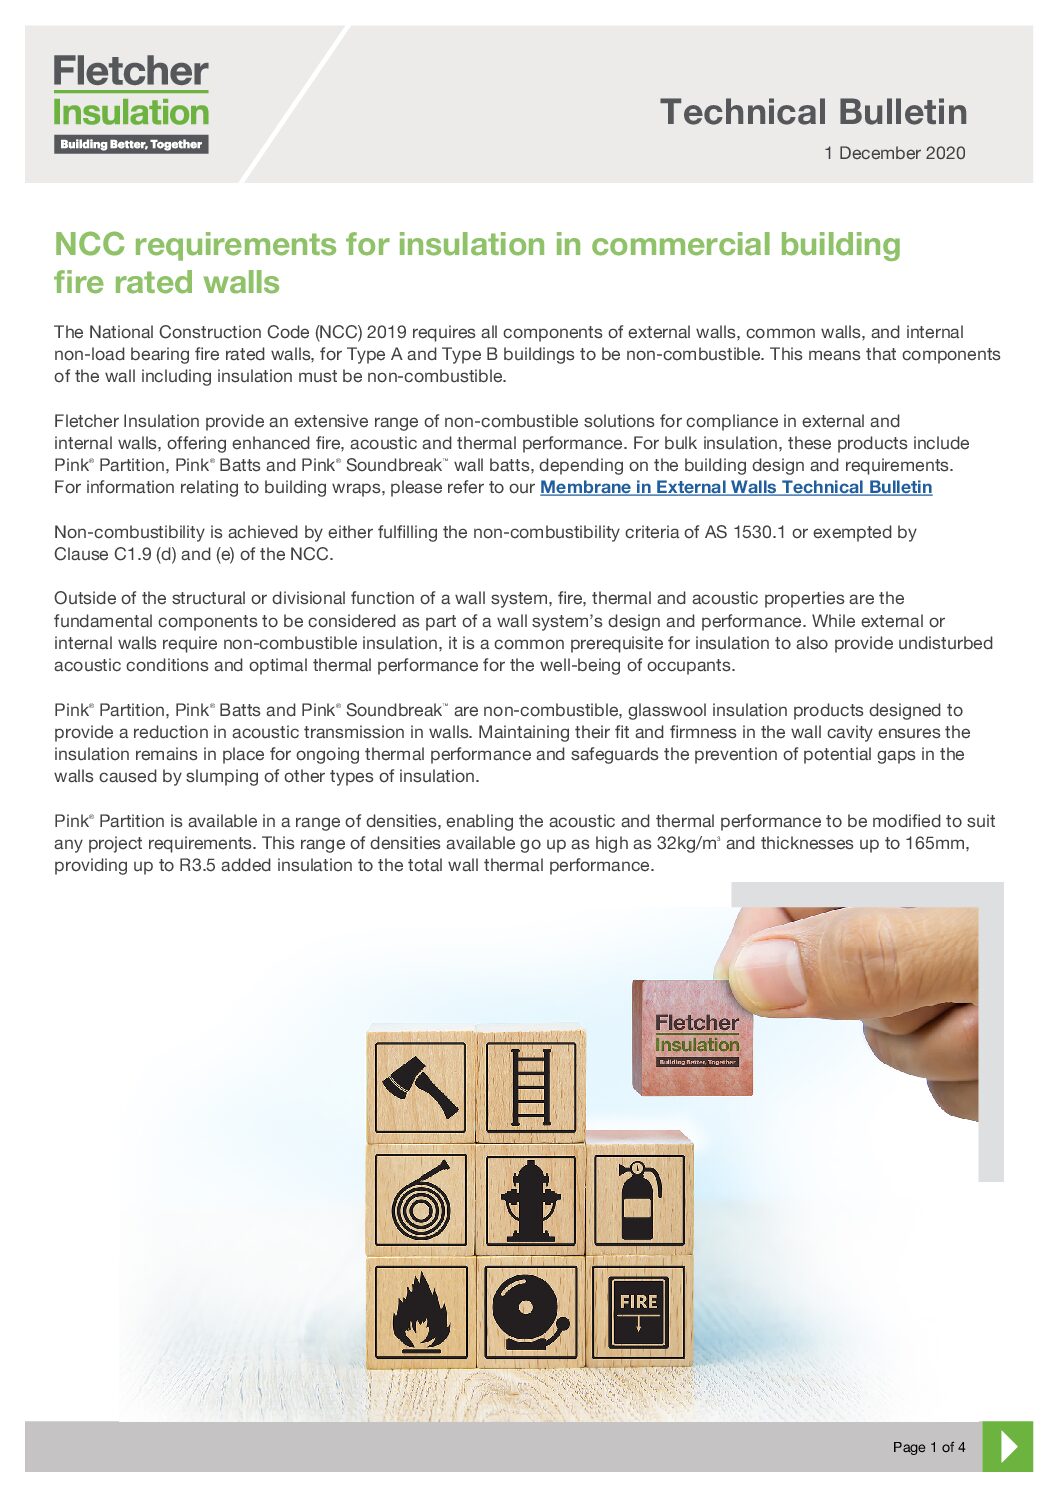 Technical Bulletin – NCC requirements for insulation in commercial building fire rated walls